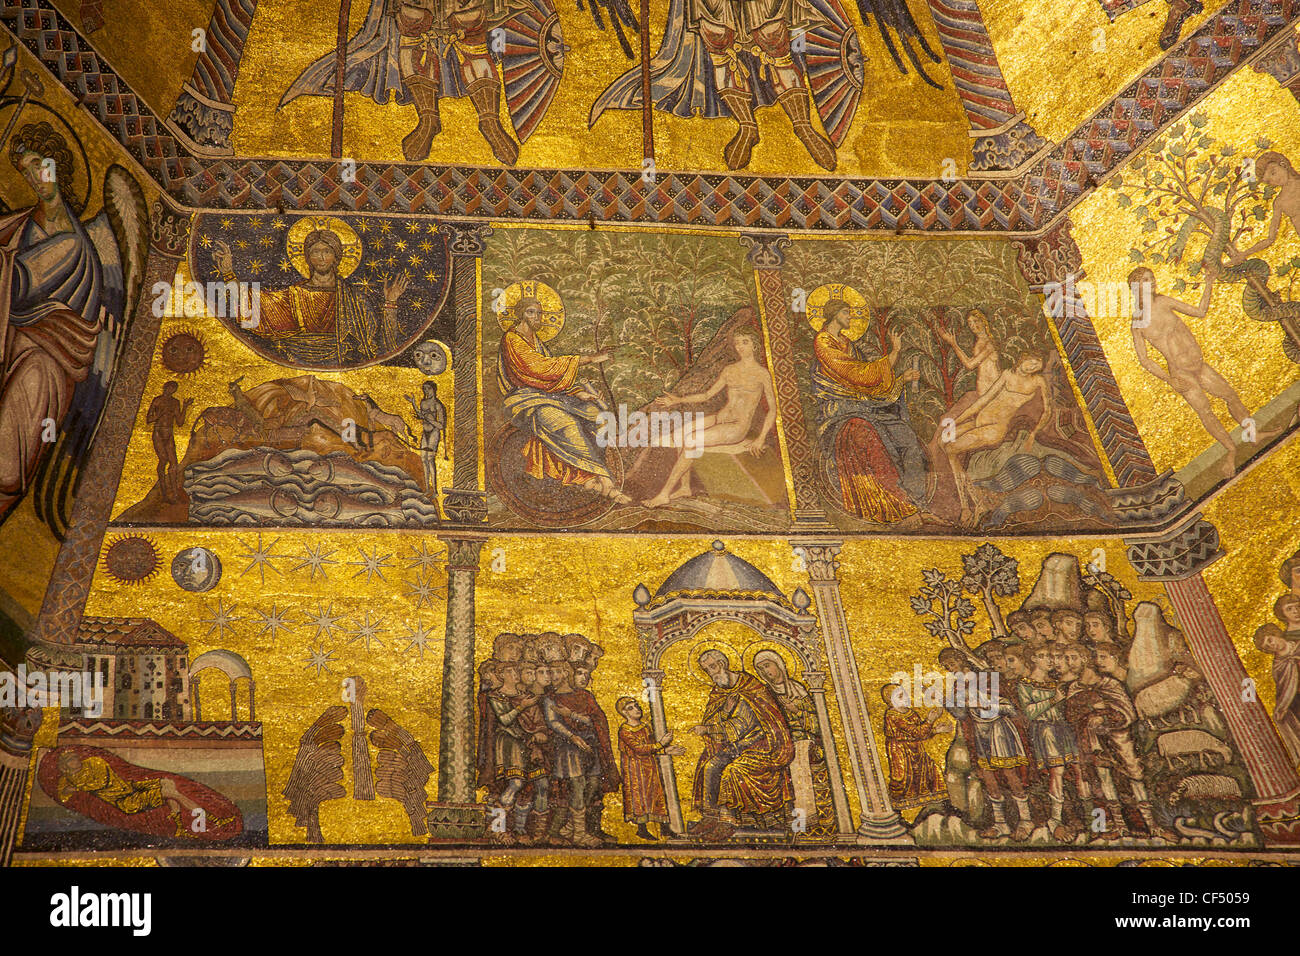 Scenes from Genesis, old testament, 13th Century mosaics, cupola ceiling, Baptistry, Florence, Tuscany, Italy, Europe Stock Photo